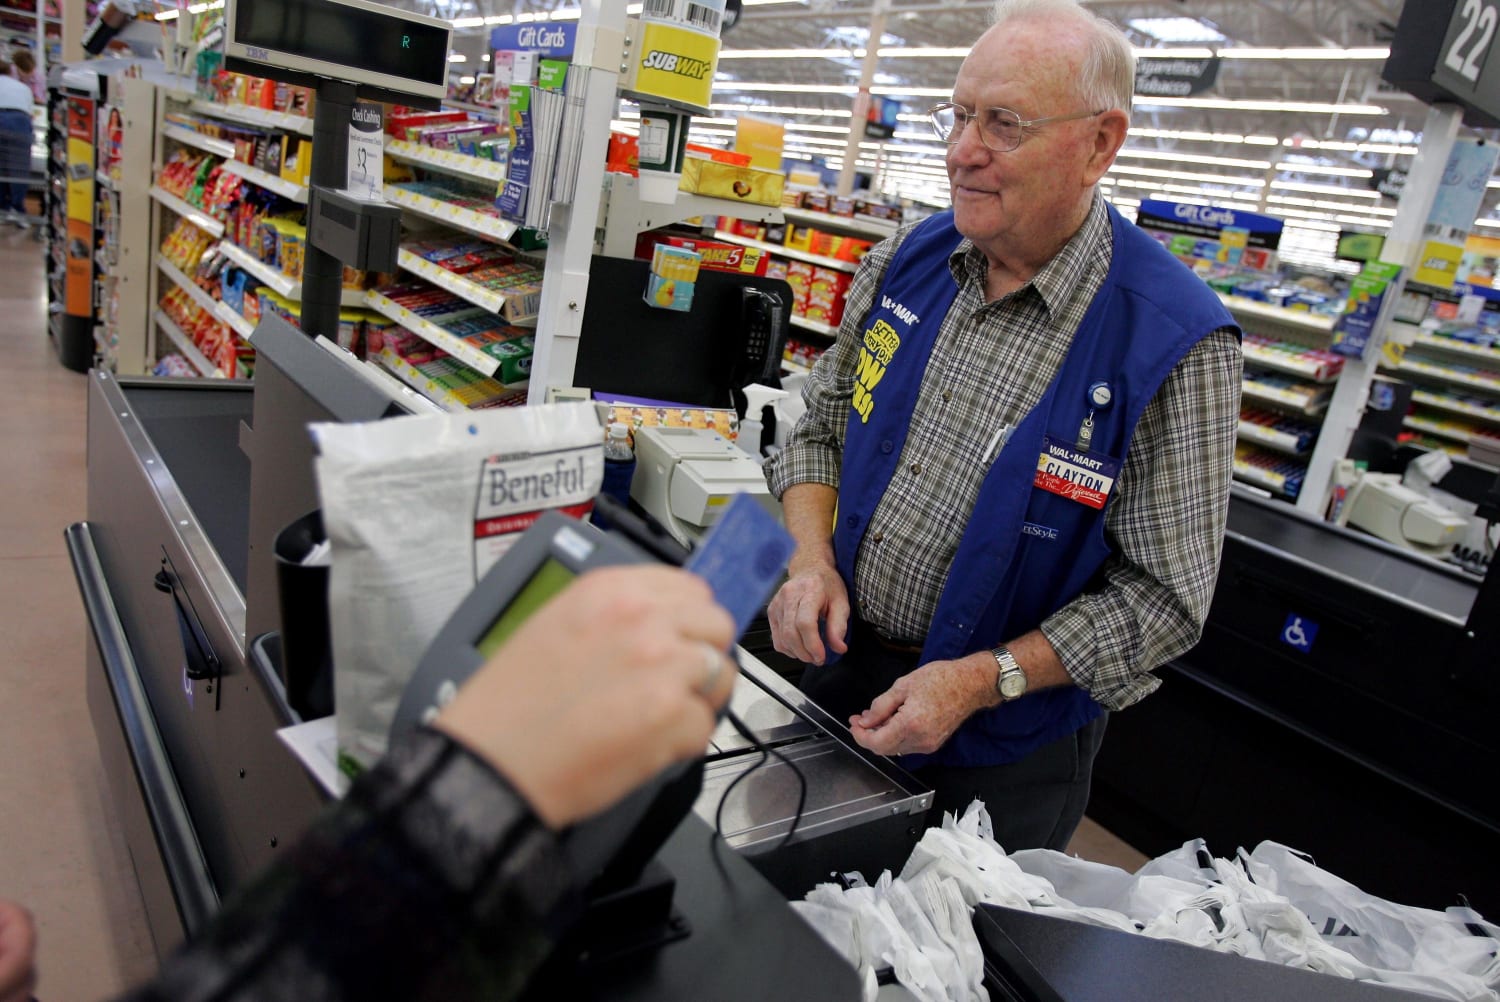 Wal-Mart Cuts 7,000 Back-Office Jobs in Push on Automation, Efficiency.